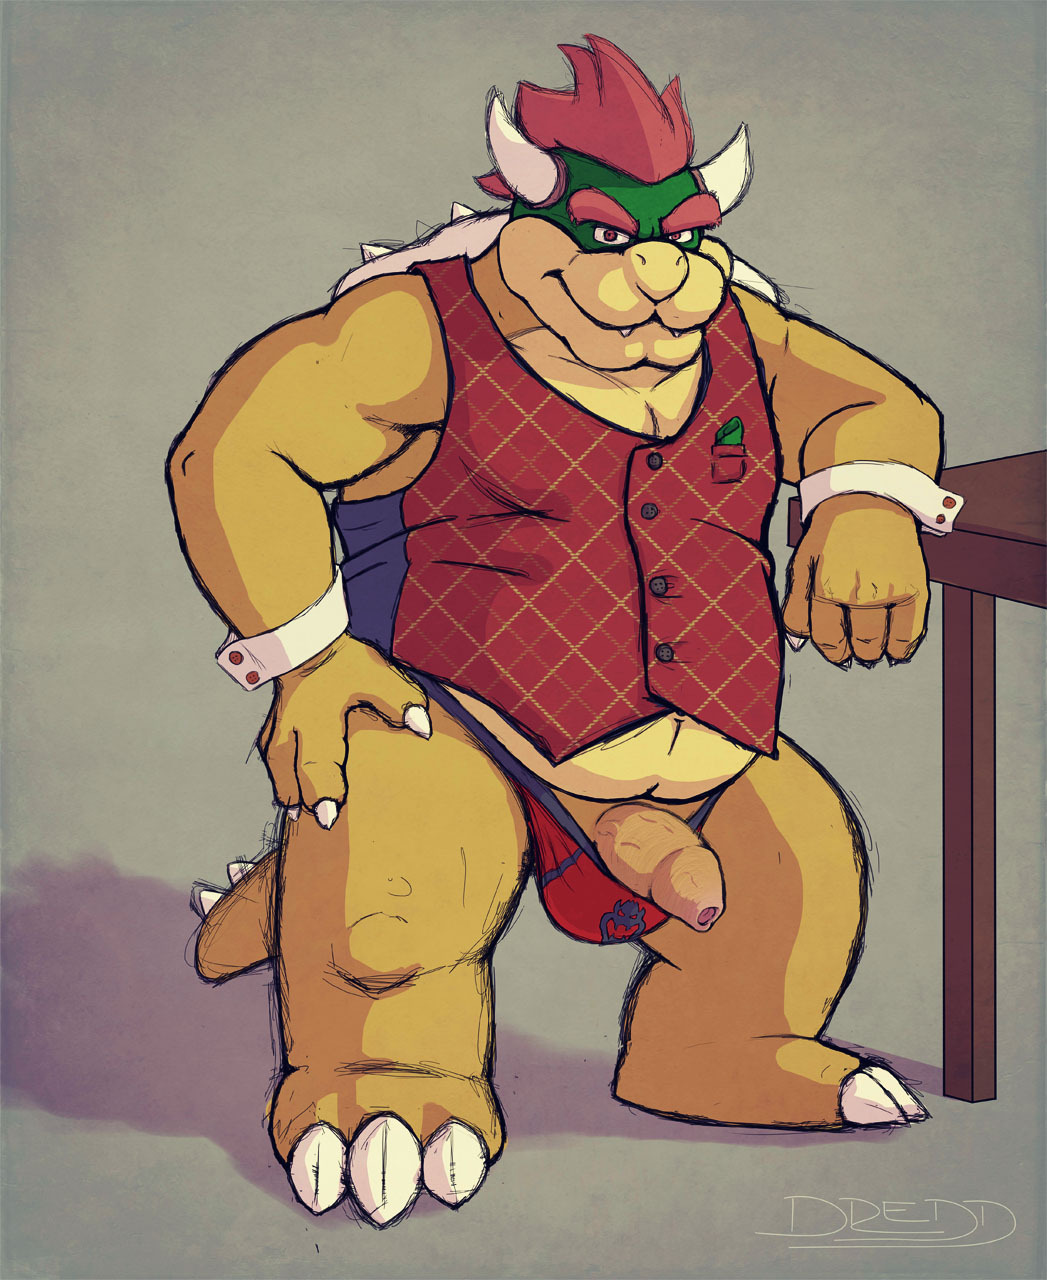 the-dredd:  bowserfan97:  Artist: Dredd Preview - ready to play Built Bowser Bowser